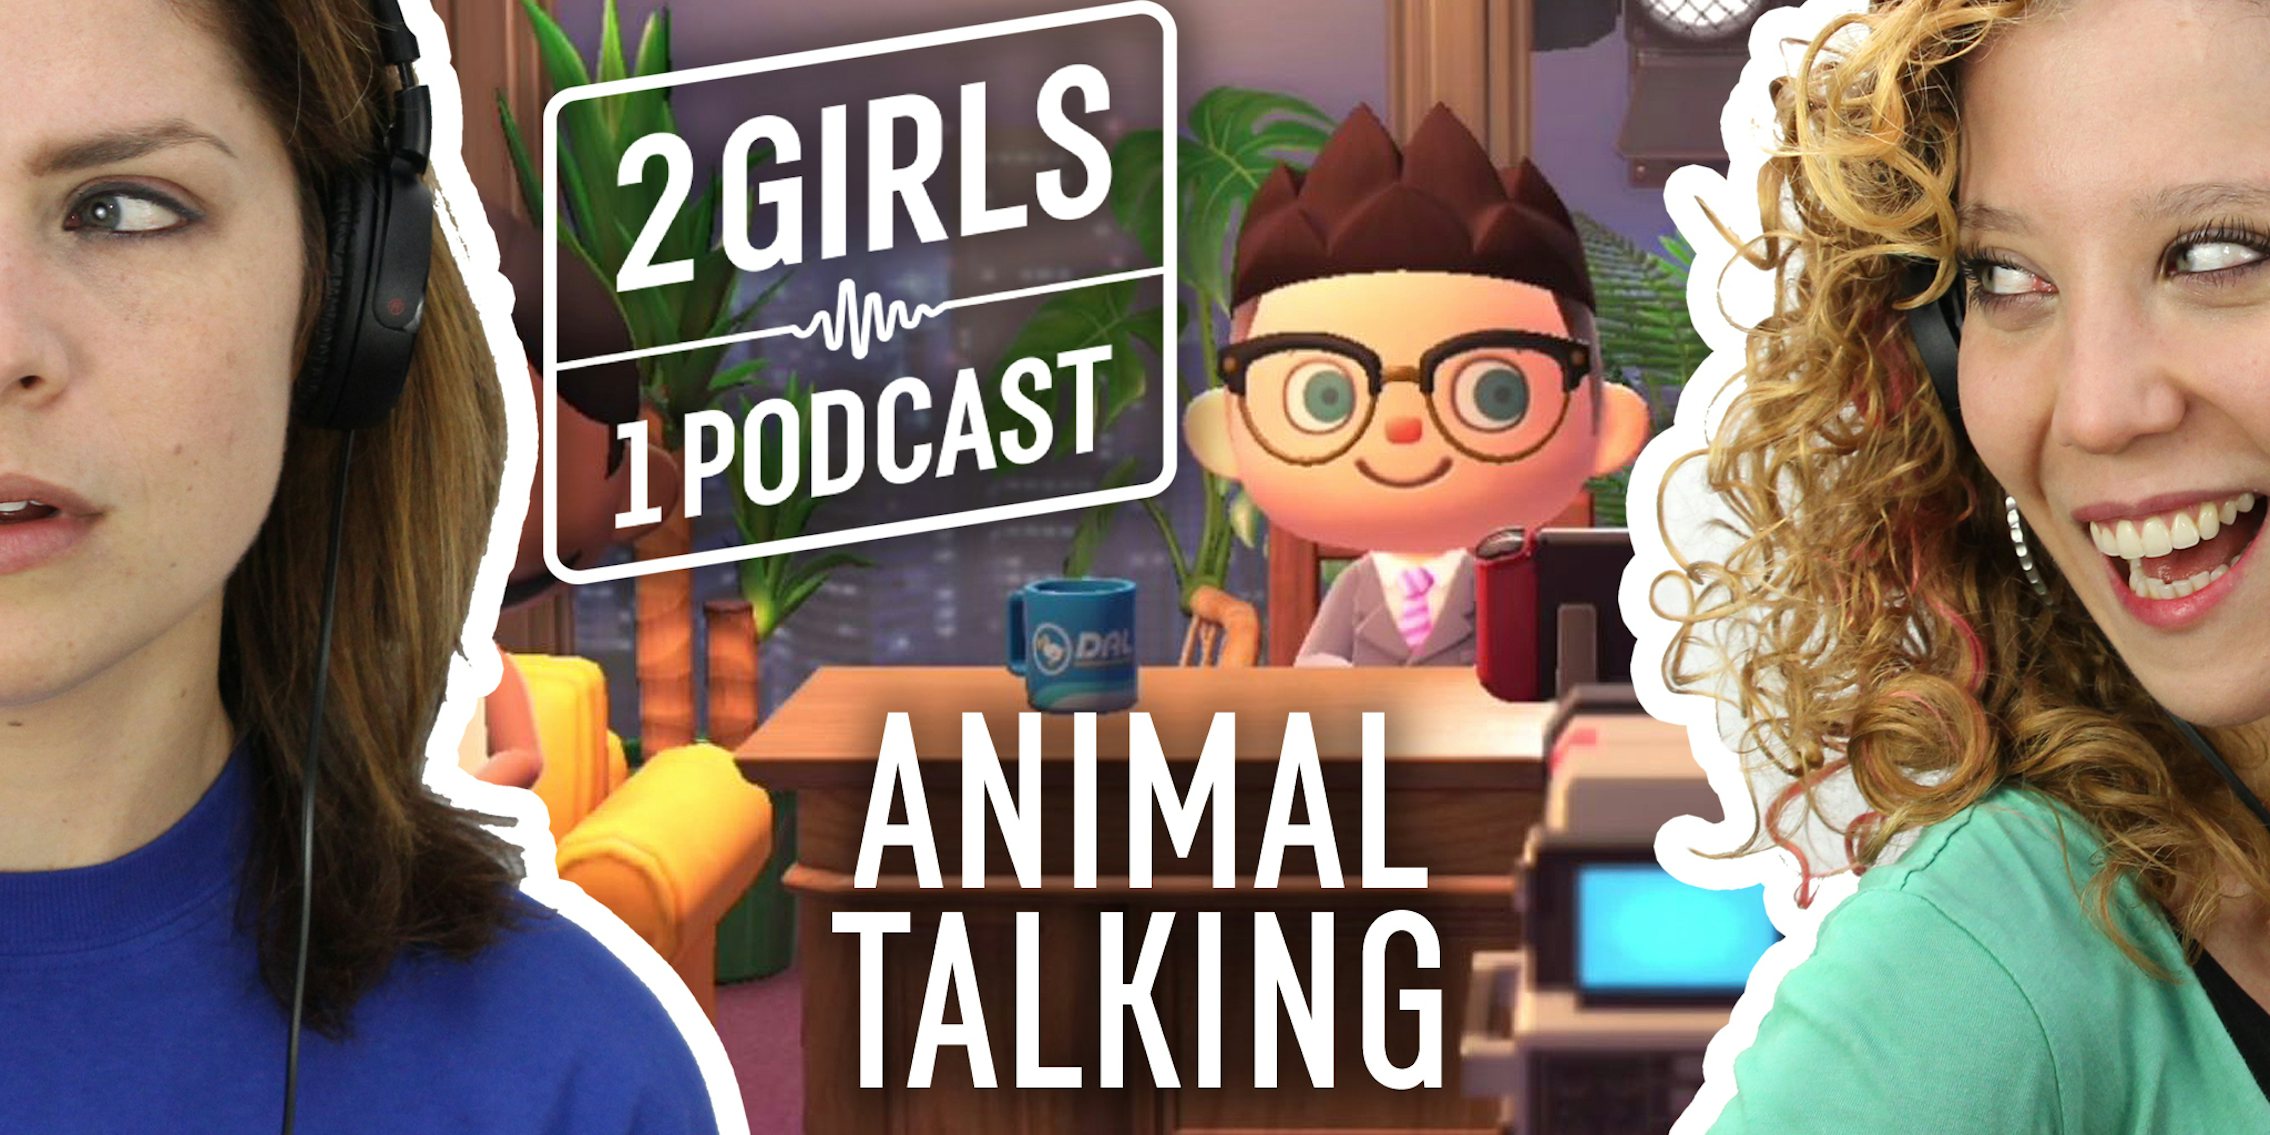 2 girls 1 podcast theme cover